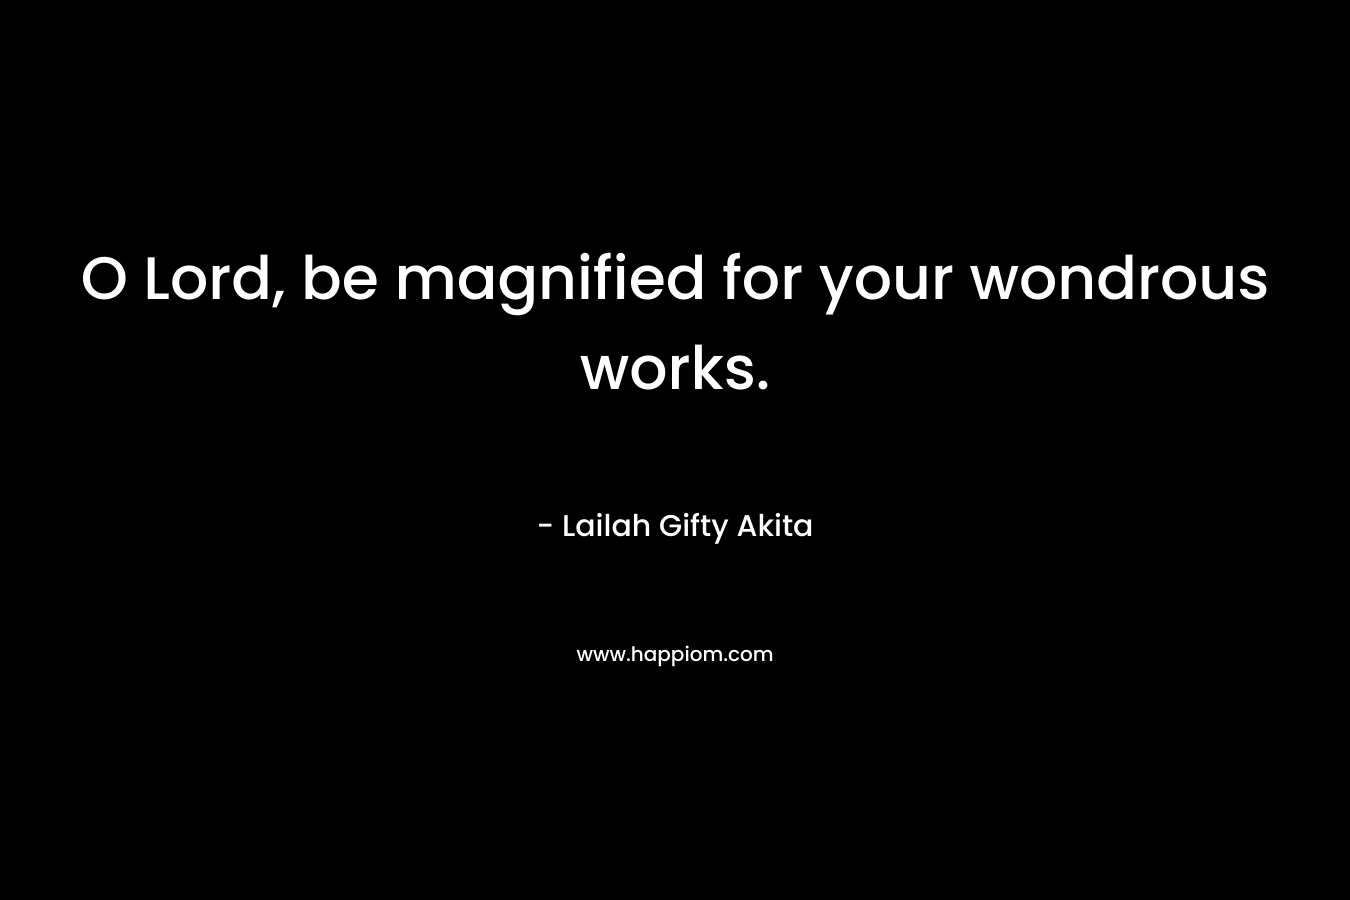 O Lord, be magnified for your wondrous works. – Lailah Gifty Akita